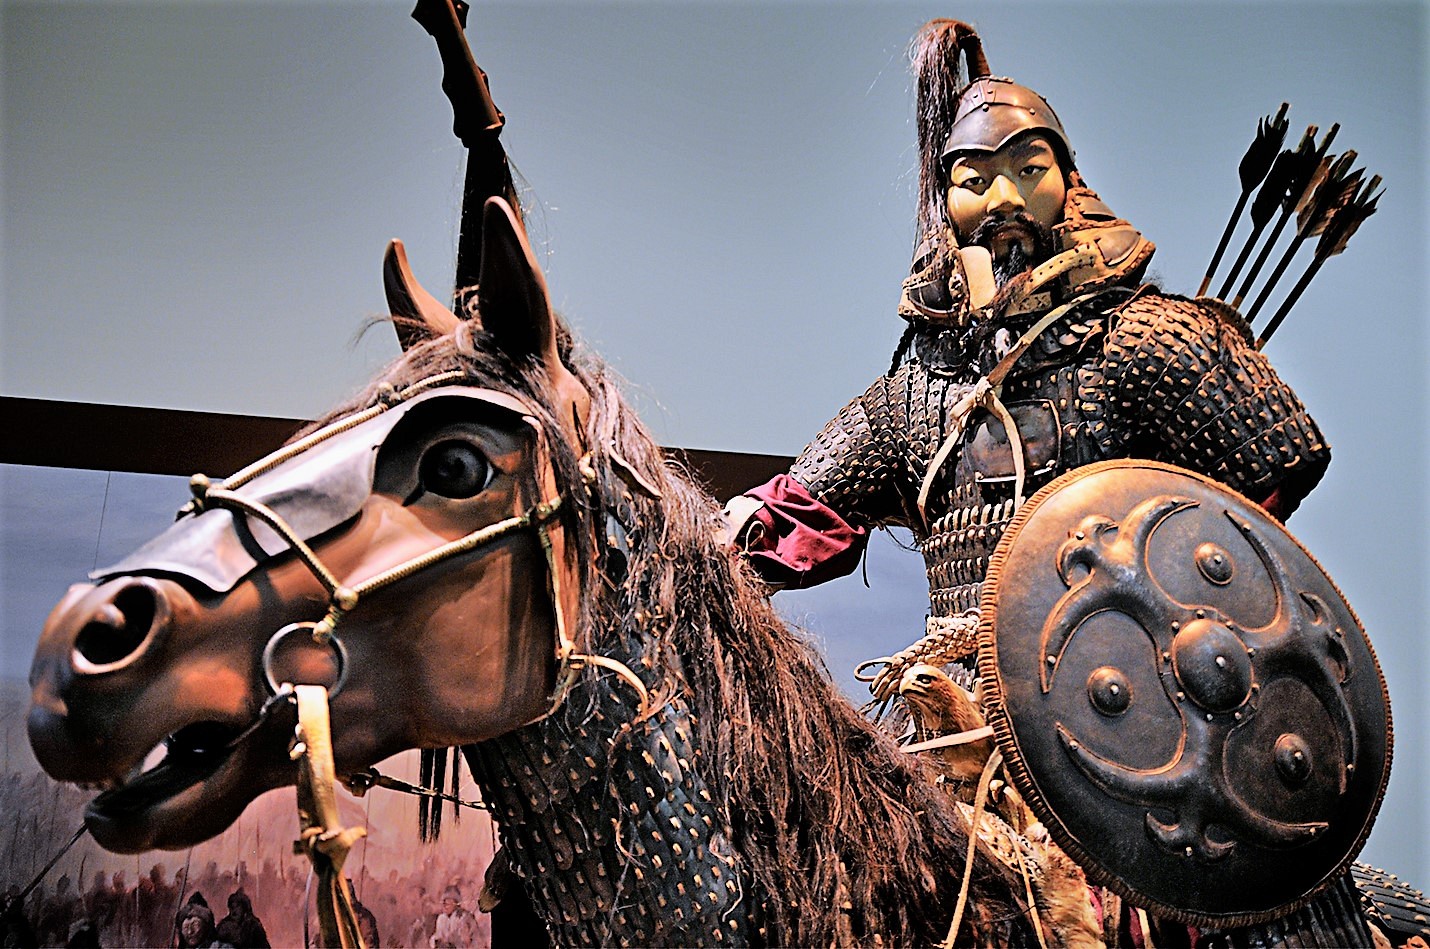 The Mongols: Were they the greatest empire in world history?